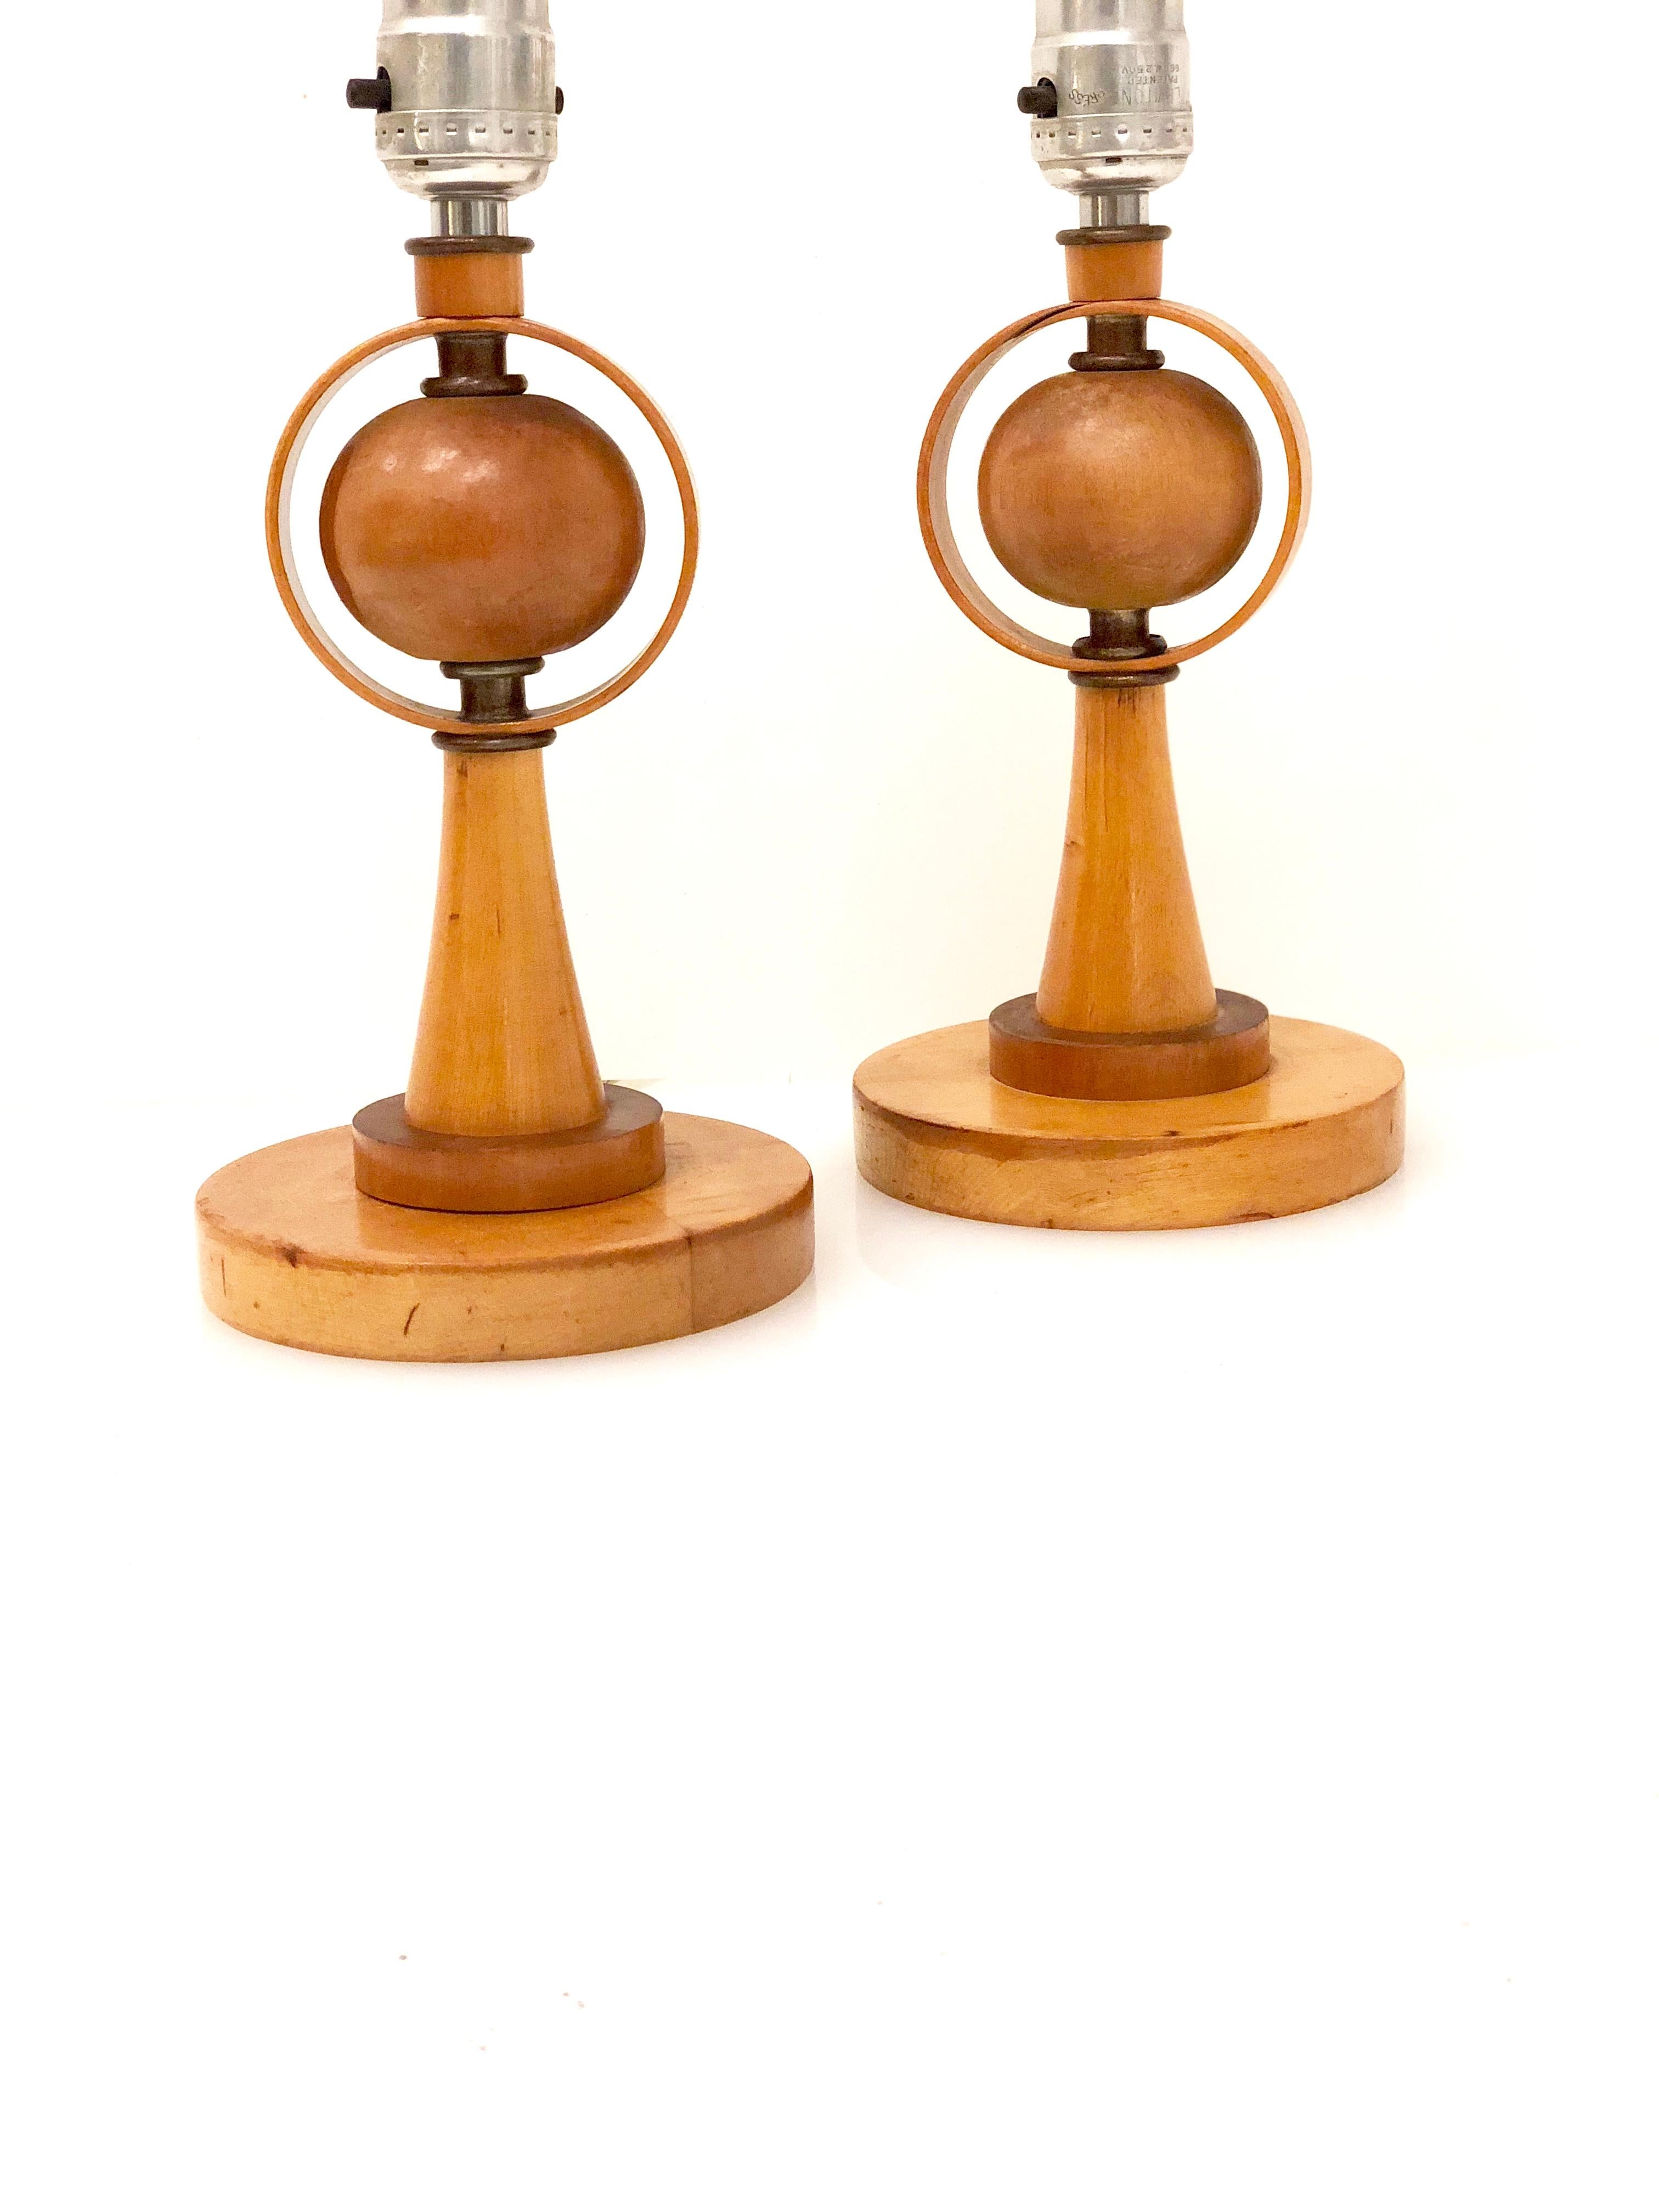 Nice pair of small table lamps in solid wood, in working condition circa 1950s solid wood details, no lamp shades. 11